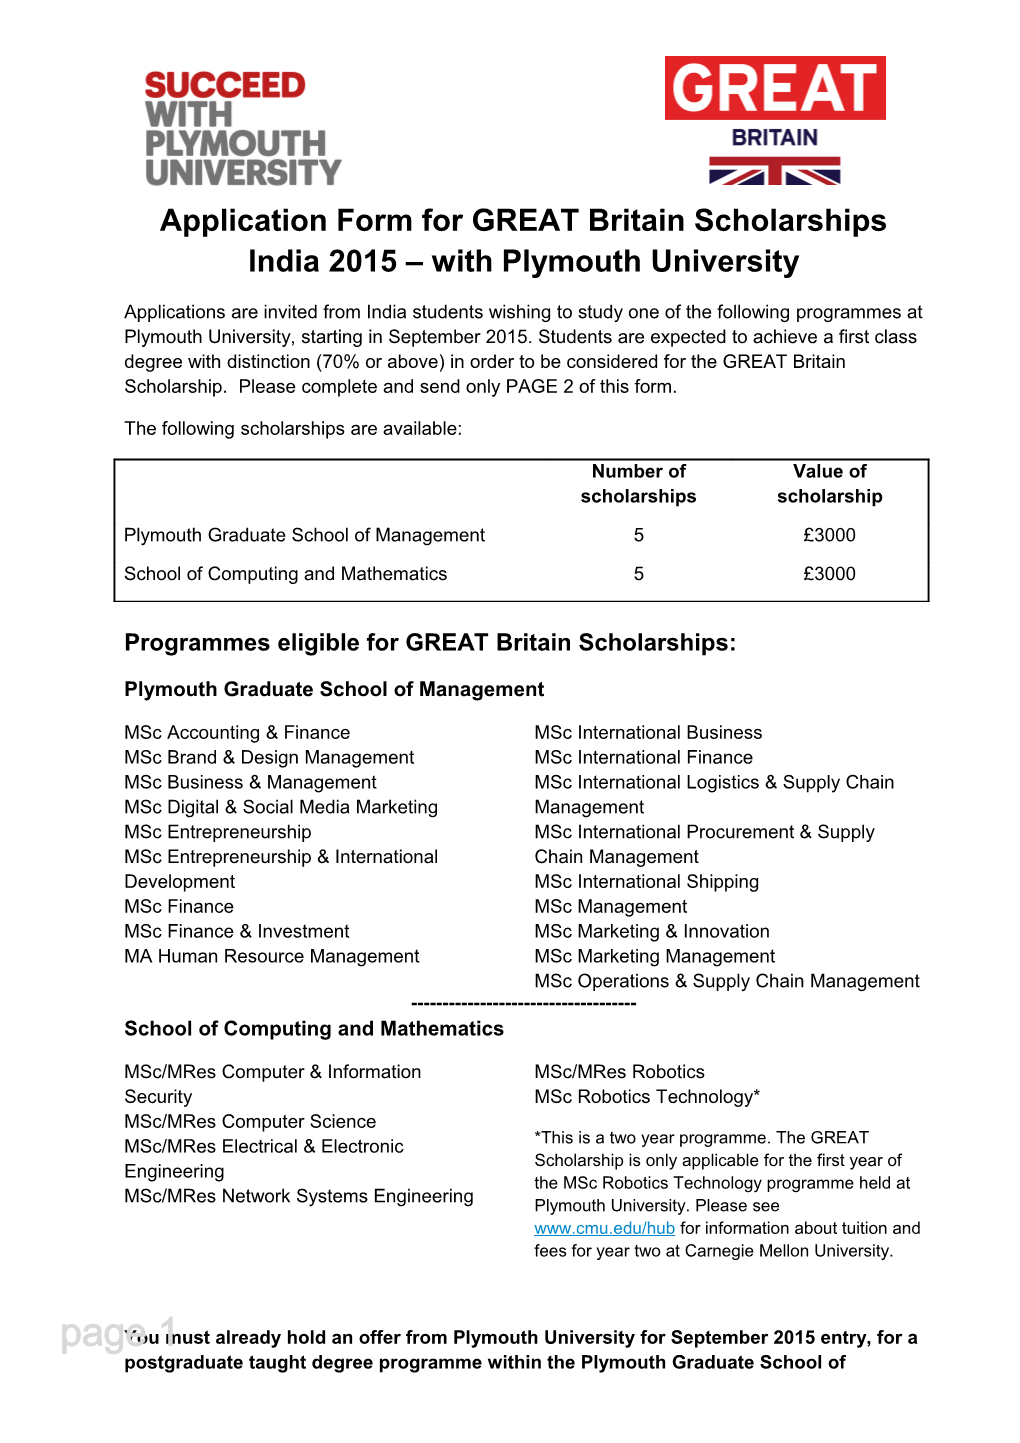 Application Form Forgreat Britain Scholarships India 2015 with Plymouth University